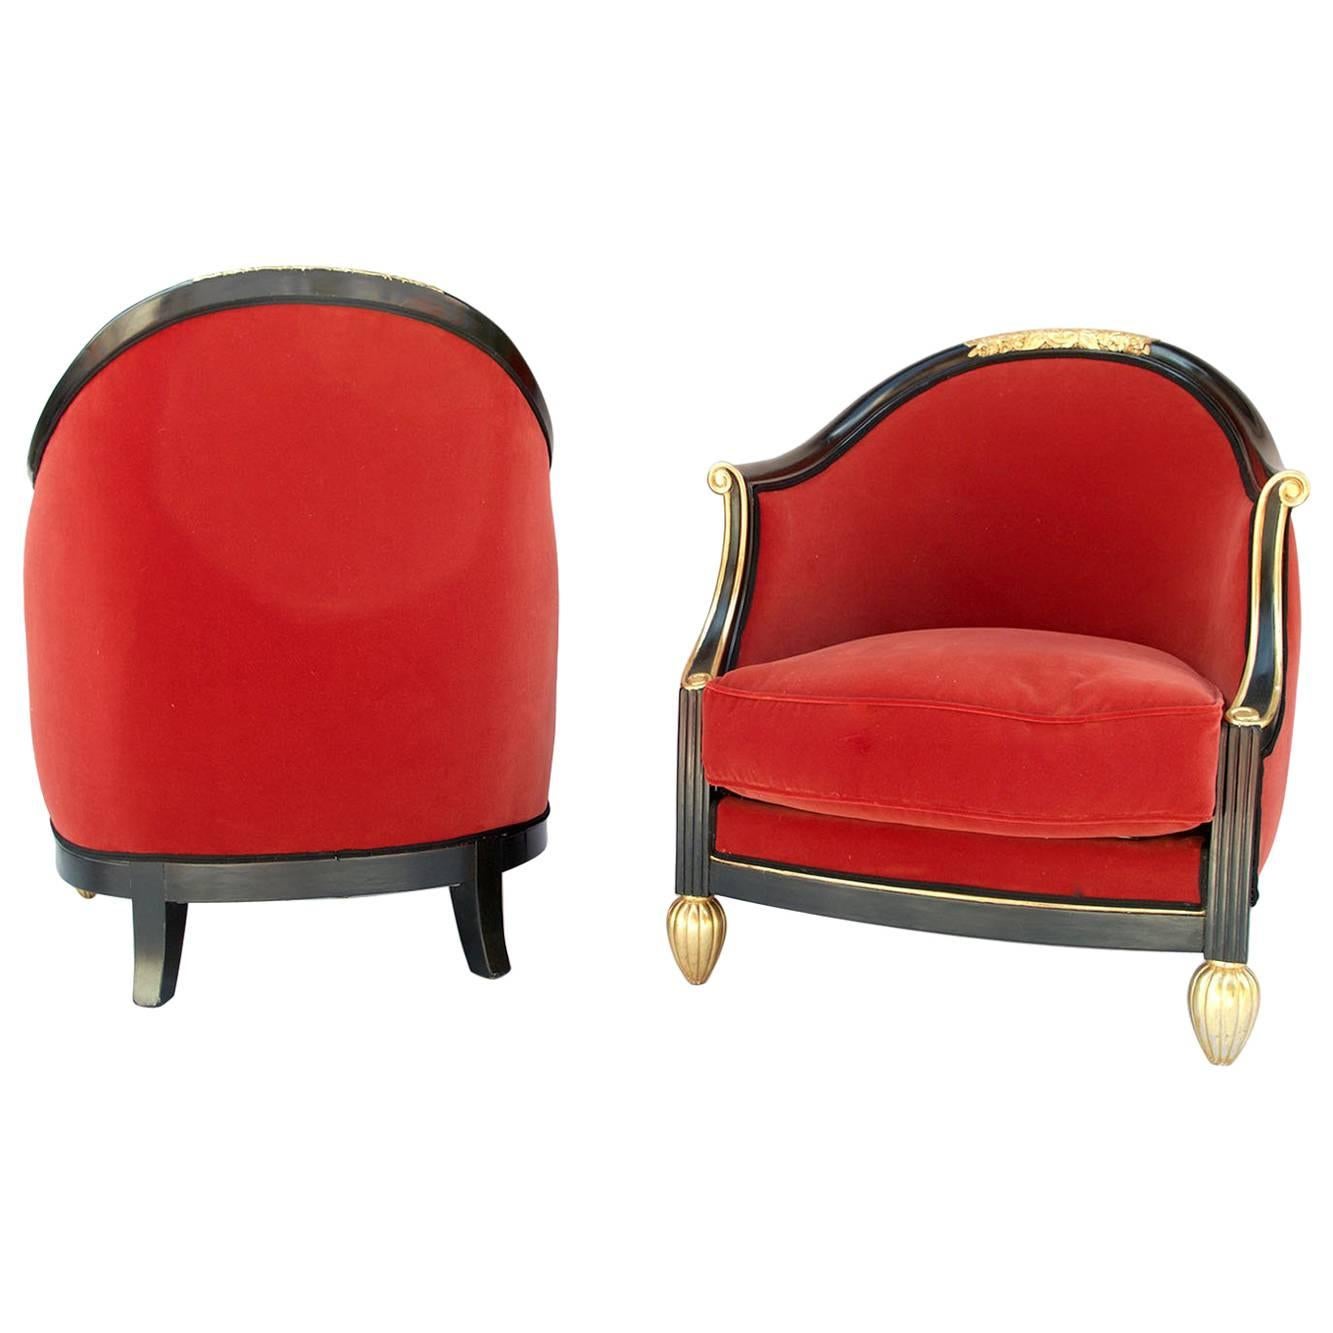 Pair of Gondole Armchairs, in the Maurice Dufrêne Style, 1920s-1930s